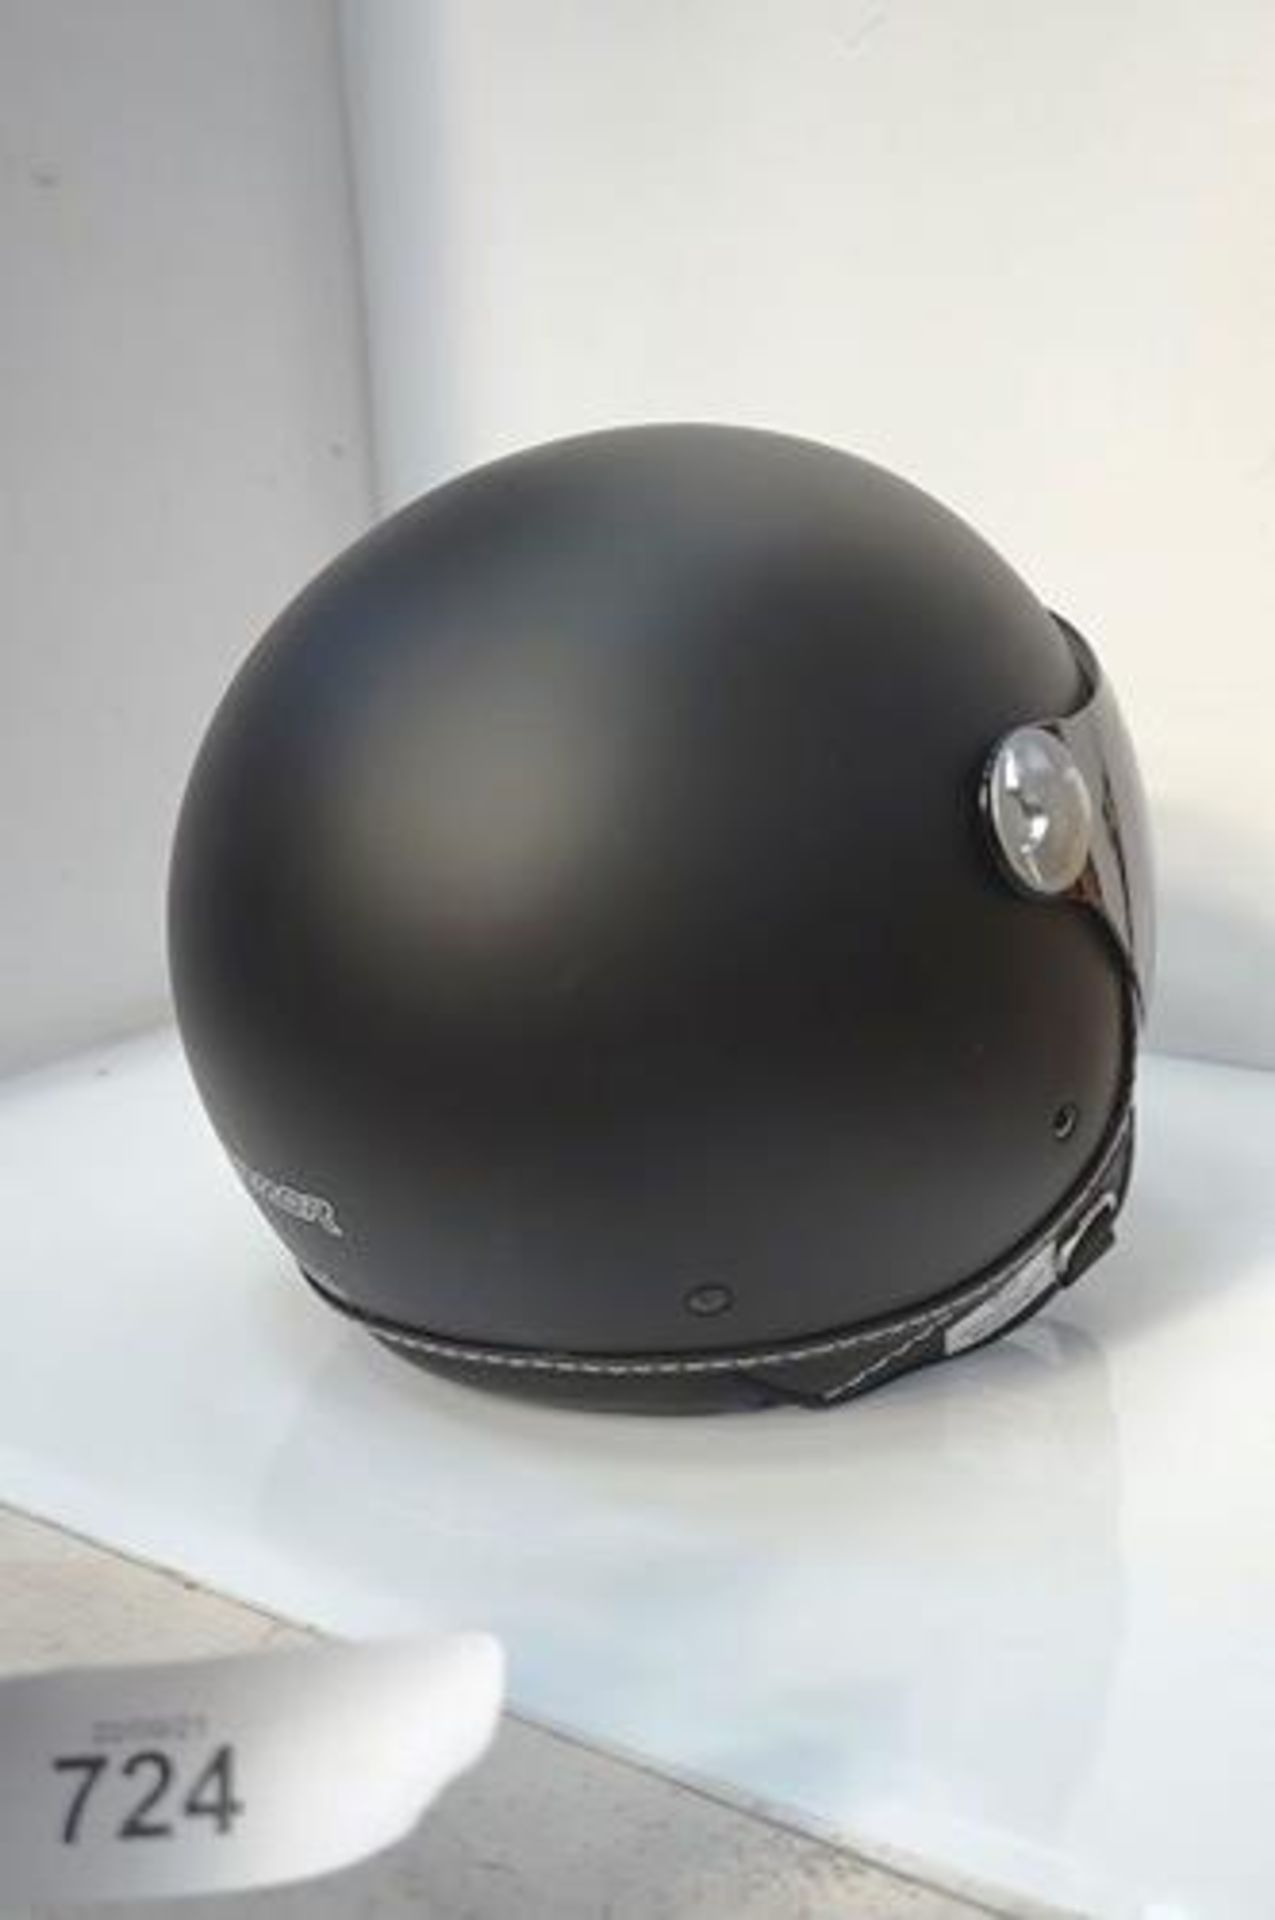 1 x Armor black motorcycle helmet, type ECE 22-05, size 55-56 - New with tags (GS15) - Image 2 of 2